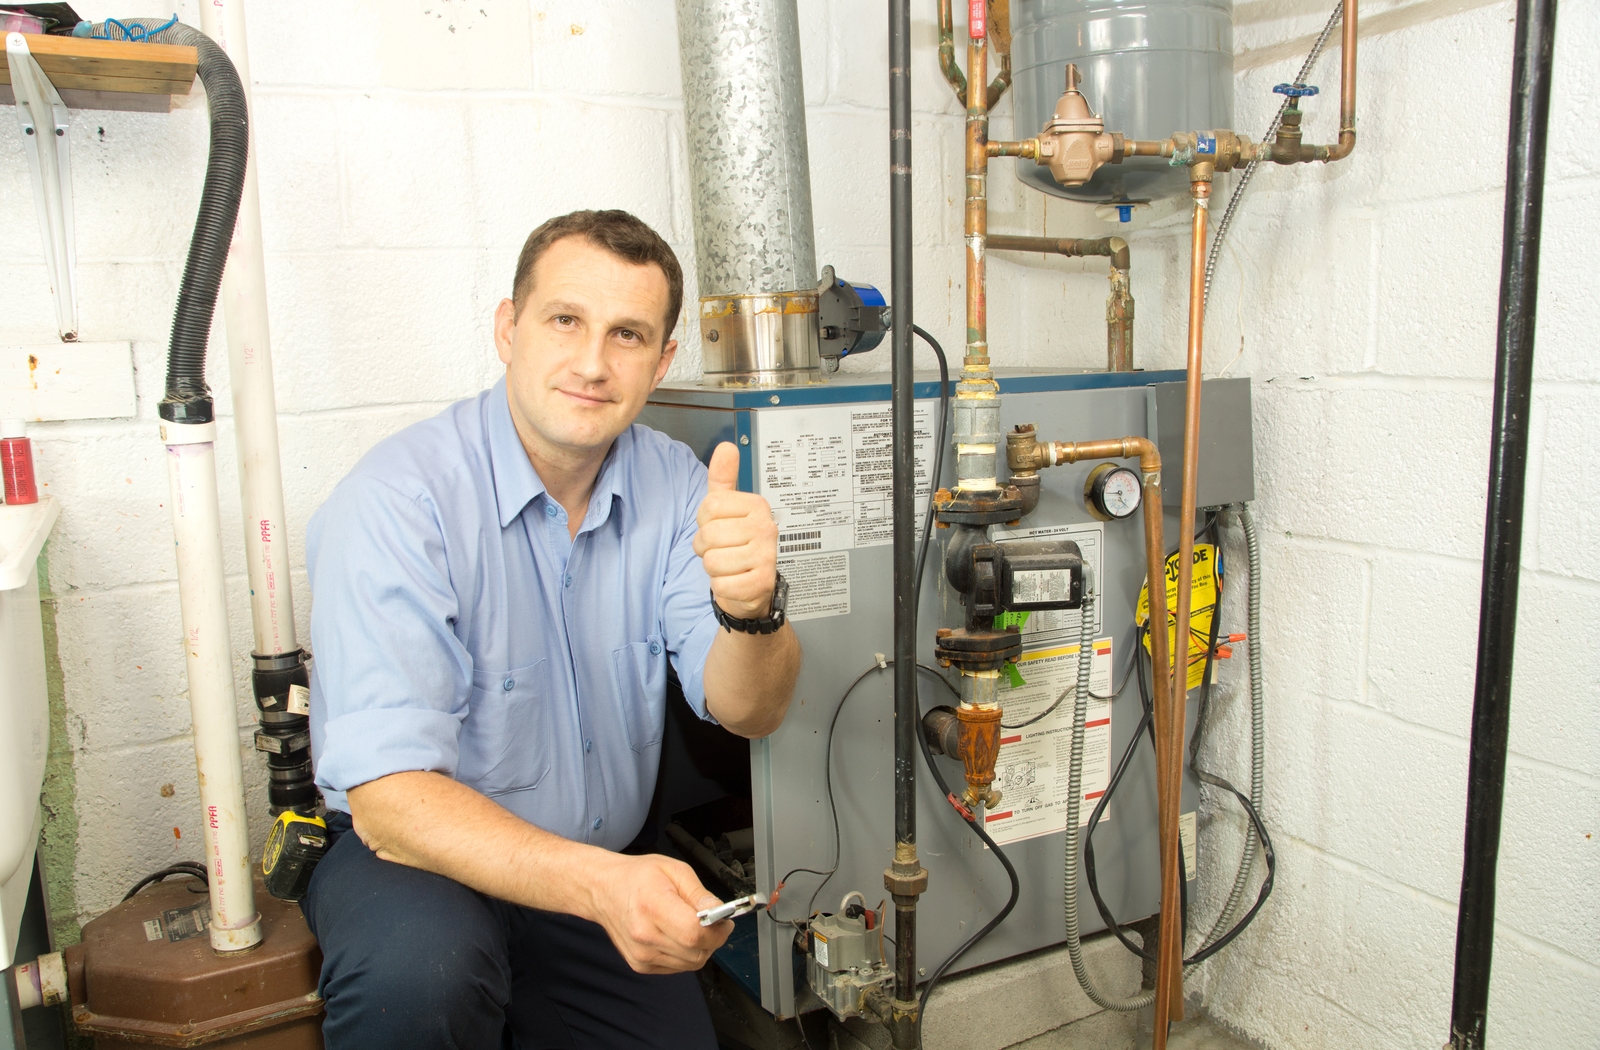 Man giving thumbs up while sitting beside furnace in basement of house